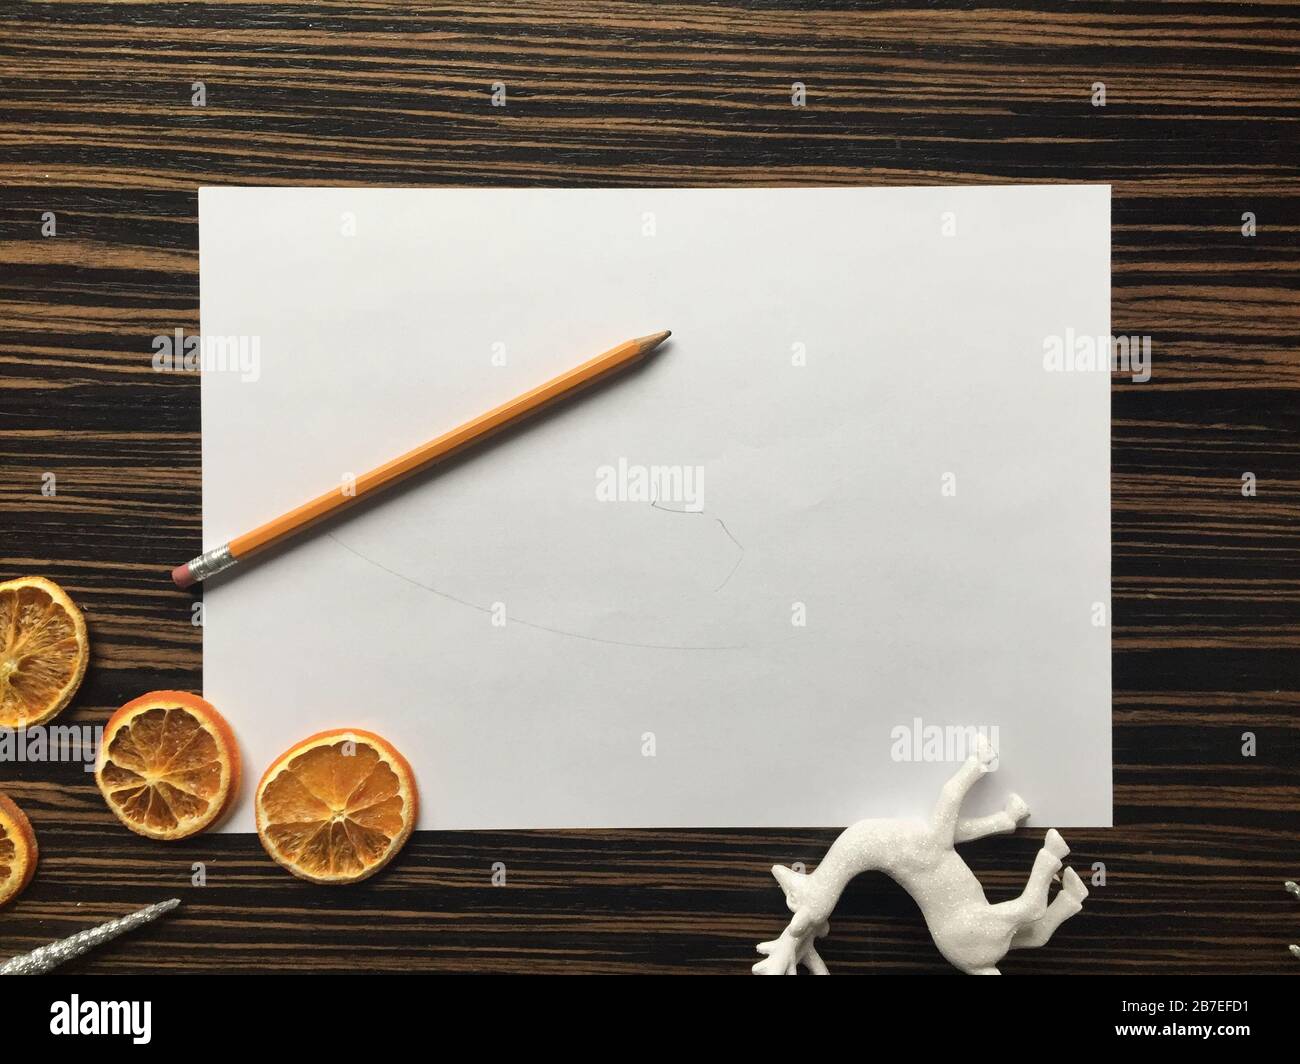 White paper put on a wooden surface together with a pencil, oranges and a deer toy Stock Photo